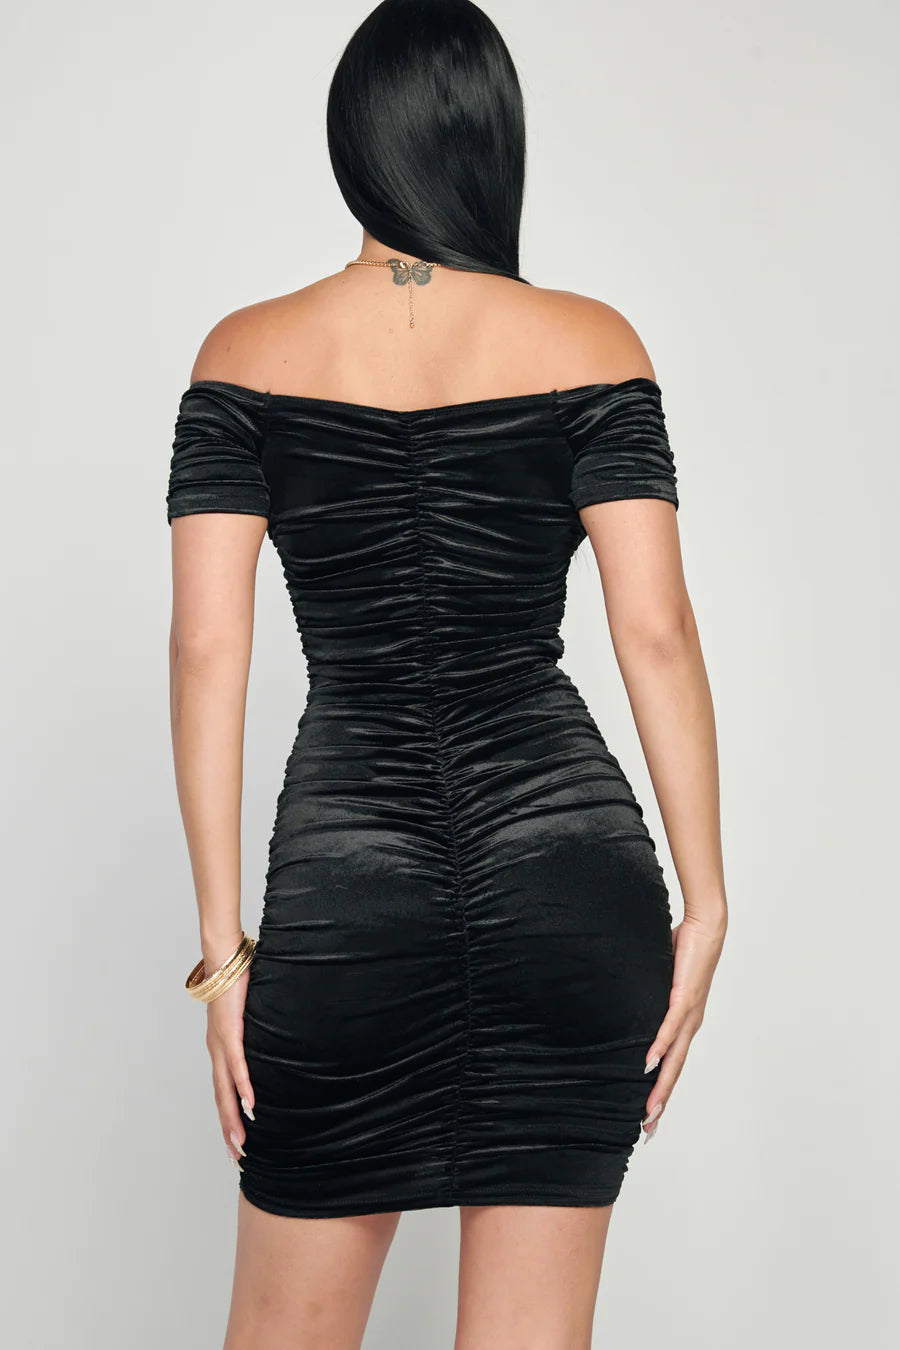 LUX SHINY VELVET OFF SHOULDER HOOKED RUCHED BODYCON MINI DRESS